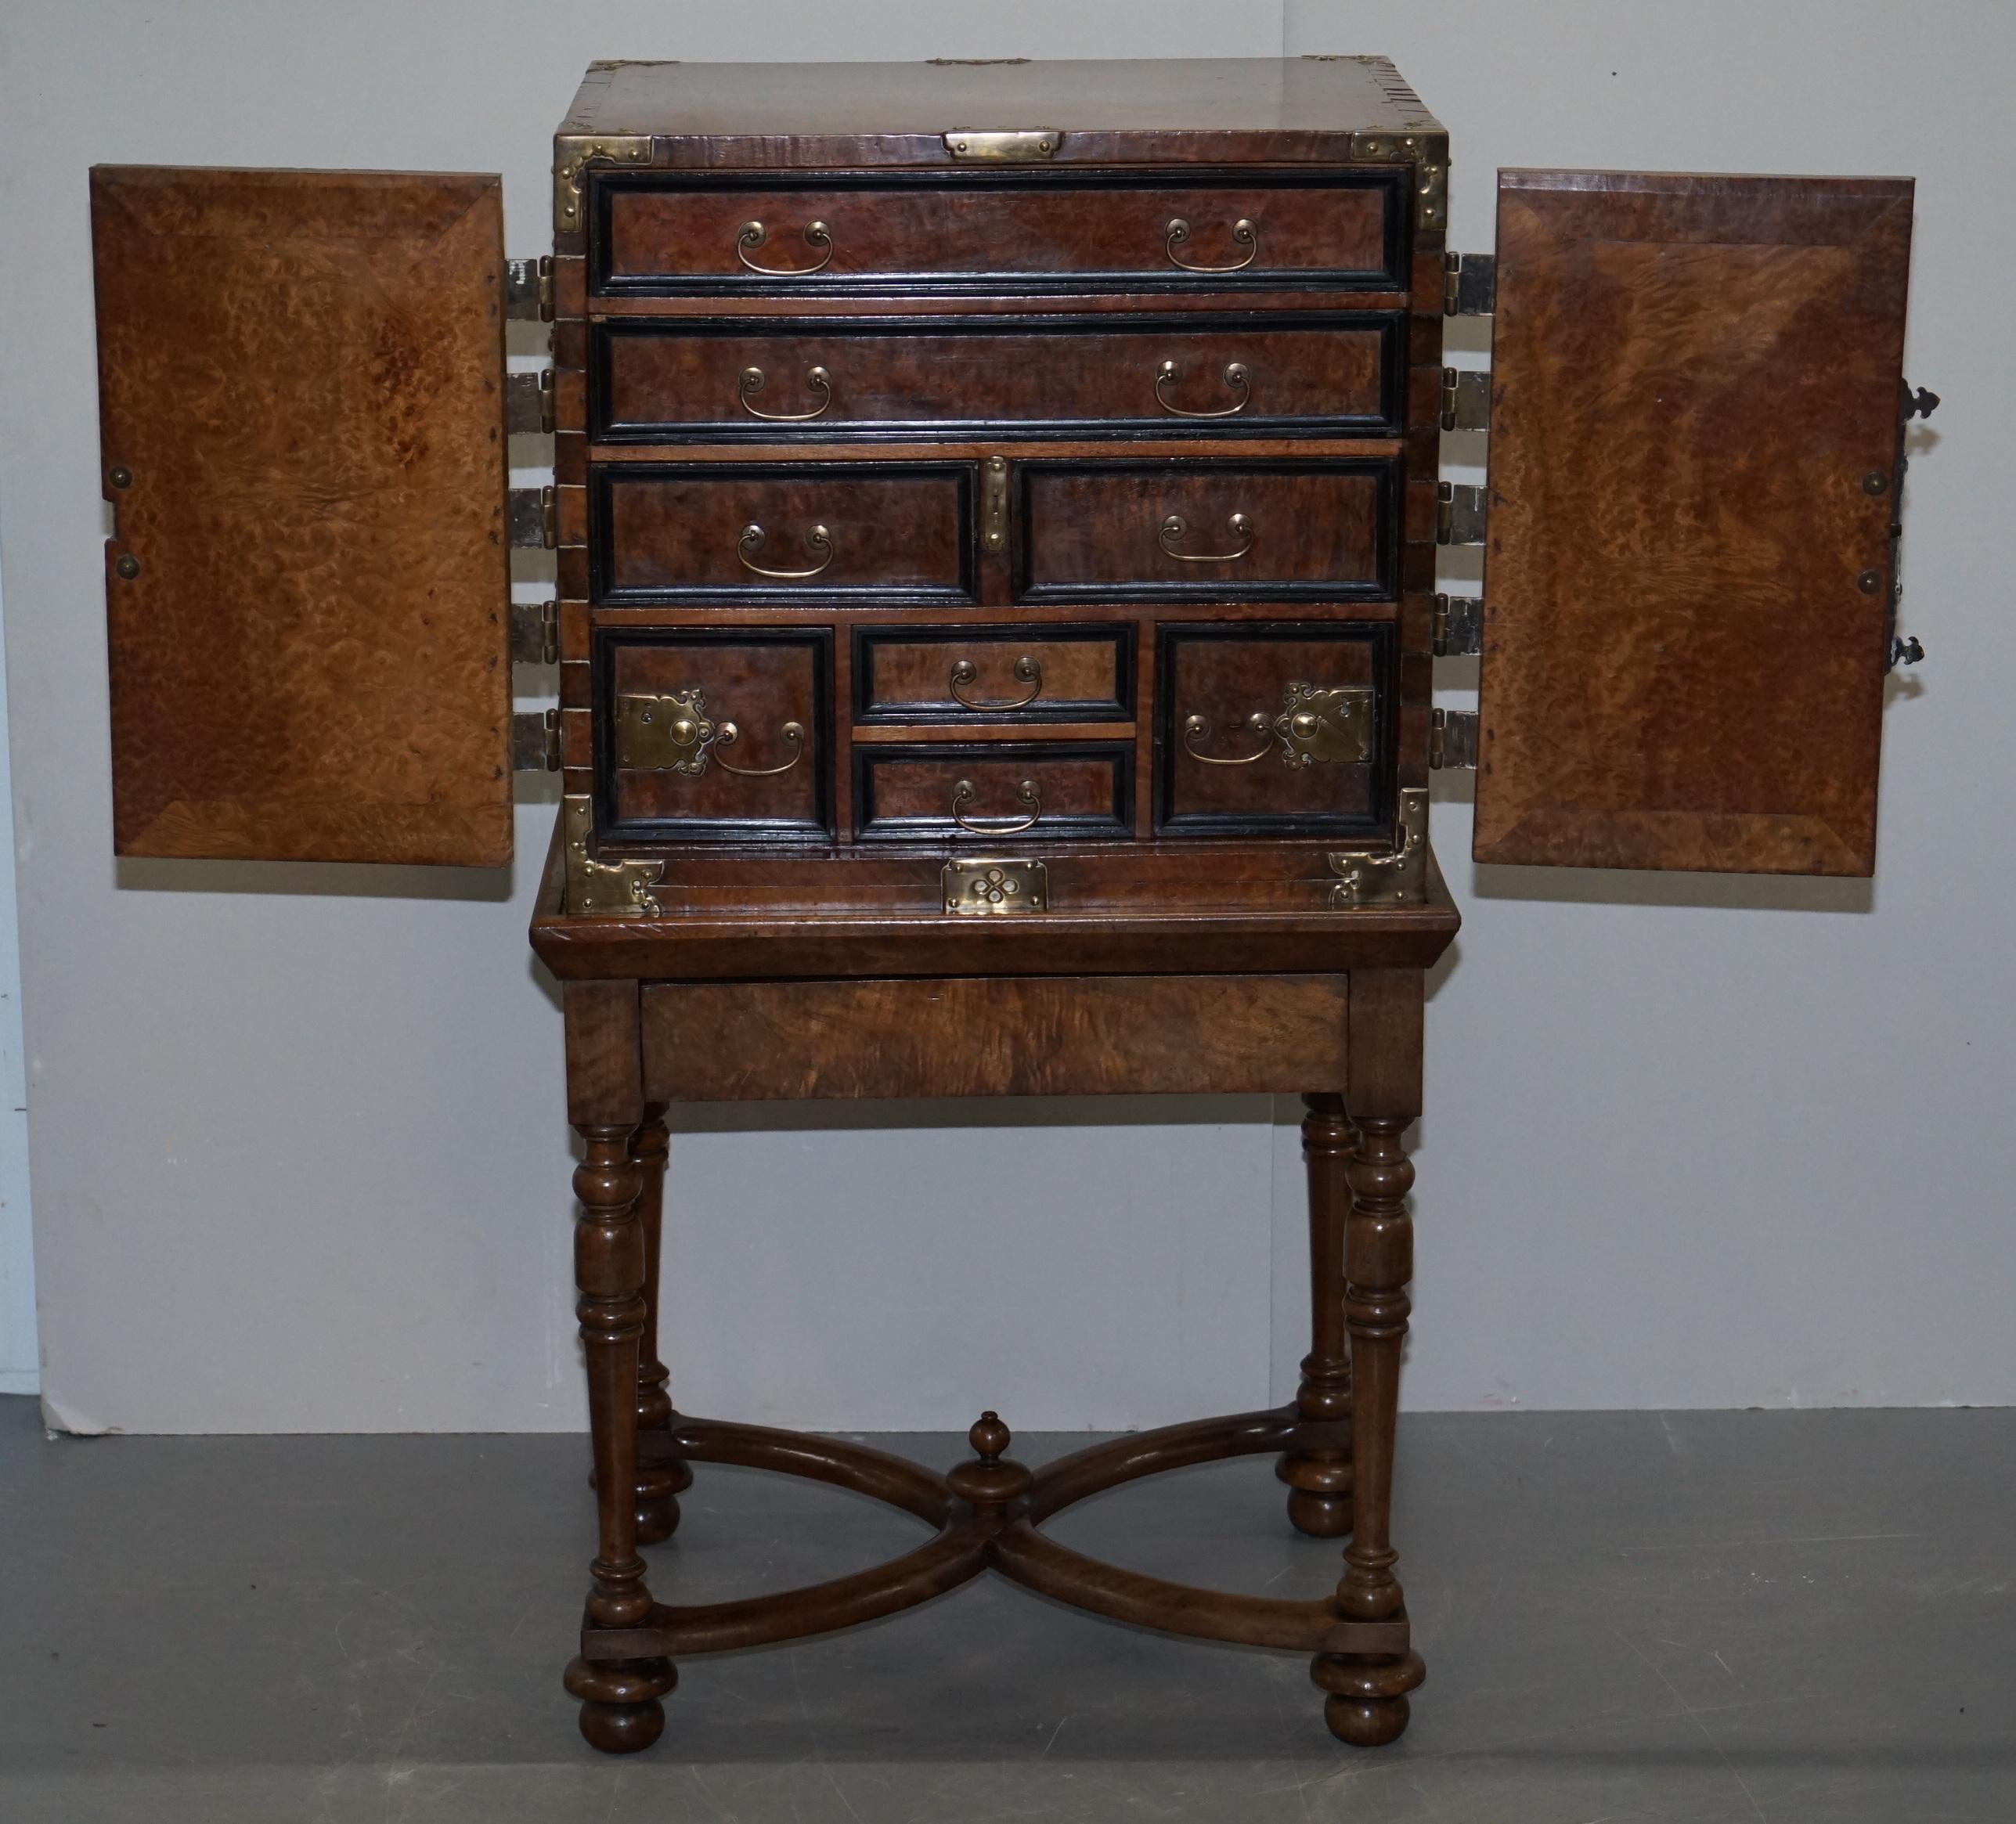 Sublime circa 1740 Portuguese Burr Walnut Campaign Cabinet on Stand Bank Drawers 9